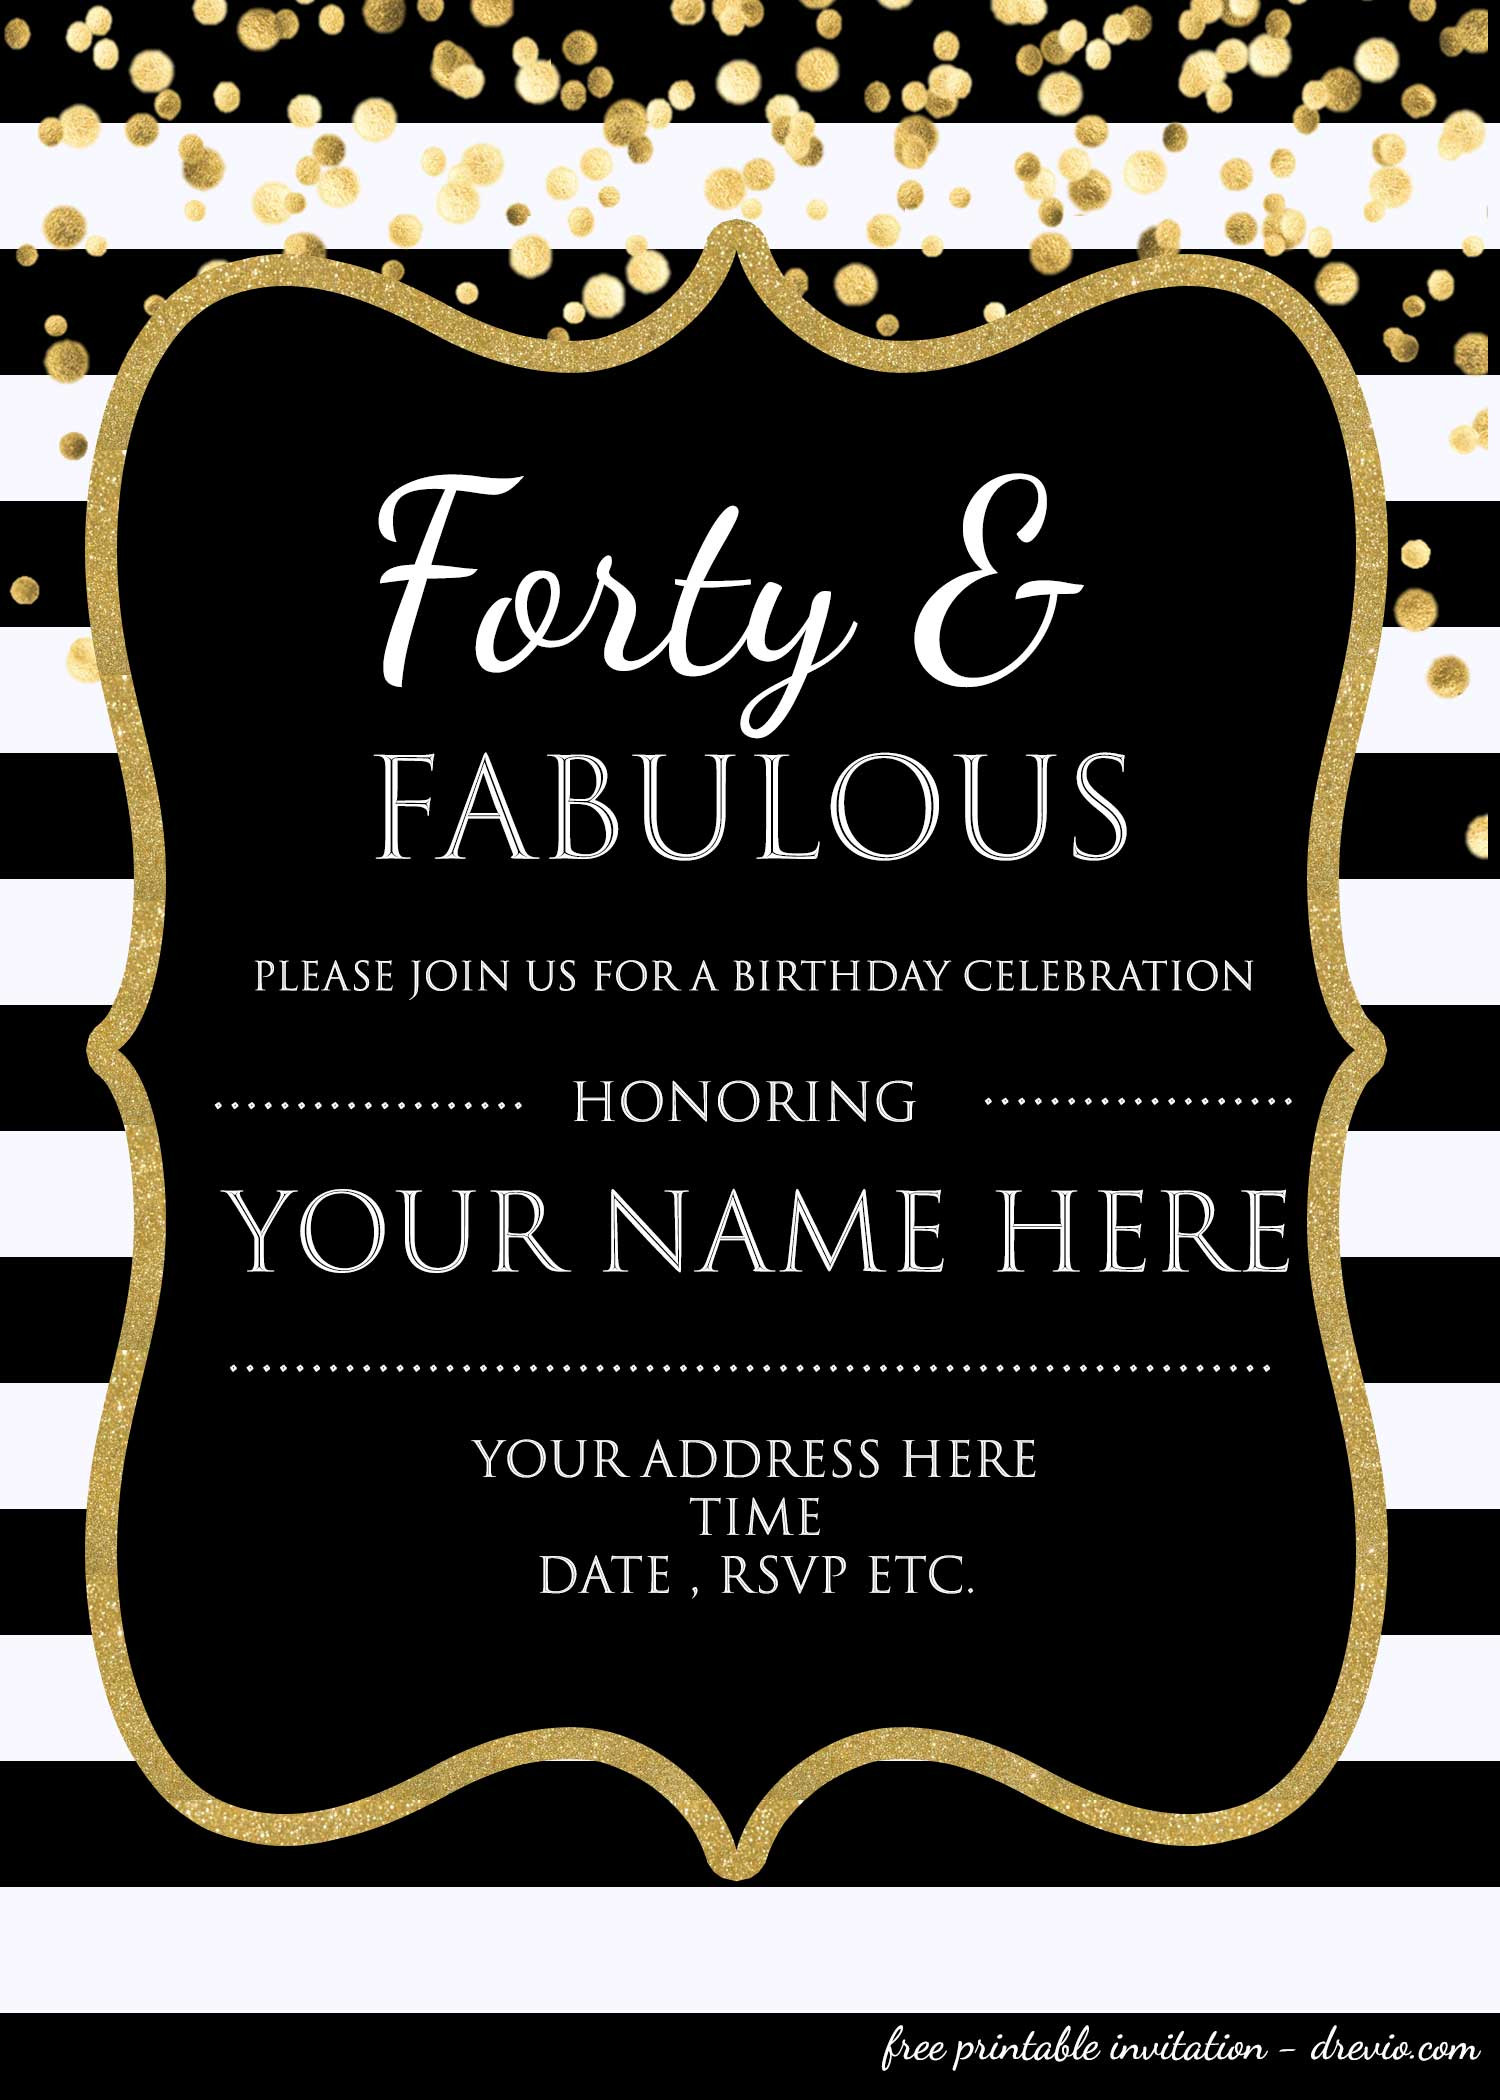 Free Templates For Birthday Invitations
 40th Birthday Invitation Template – FREE – FREE Printable